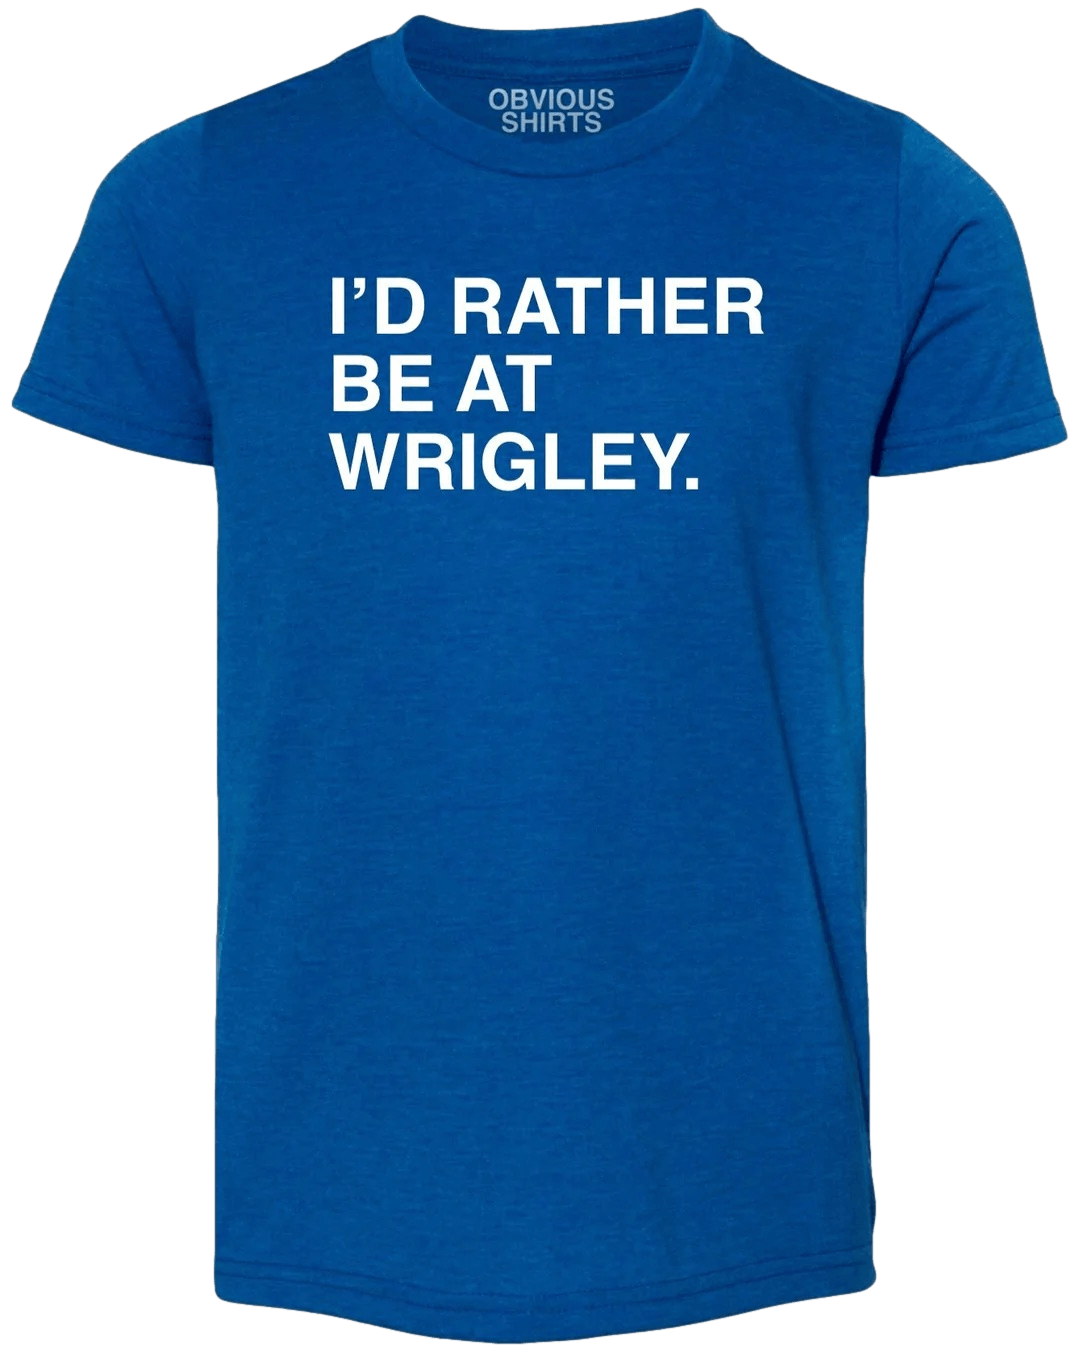 I'D RATHER BE AT WRIGLEY. (YOUTH) - OBVIOUS SHIRTS